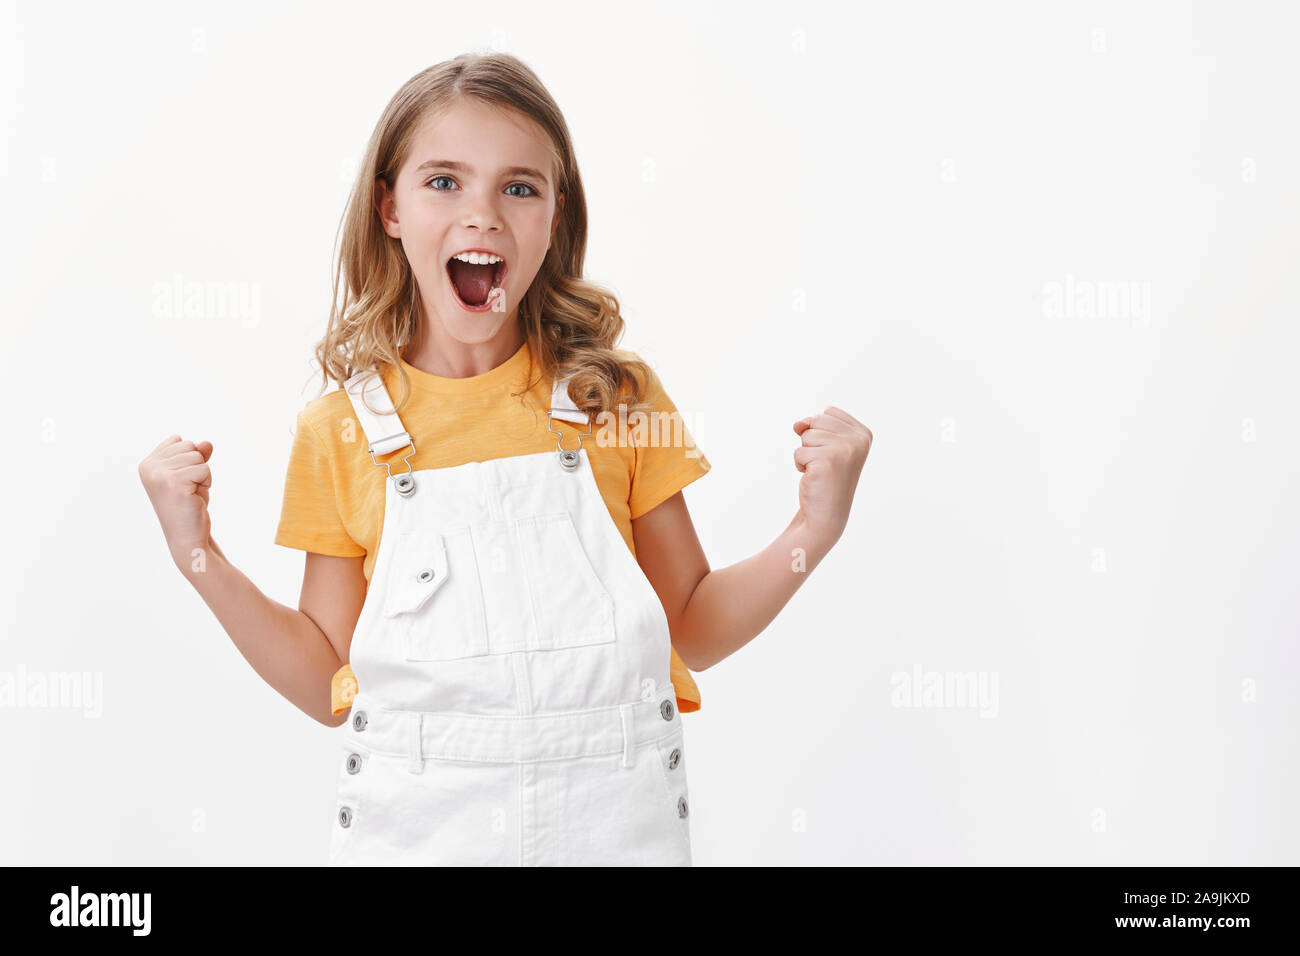 Proud good-looking young satisfied little girl with fair hair and blue eyes, fist pump celebration gesture, smiling joyfully, achieve success, triumph Stock Photo